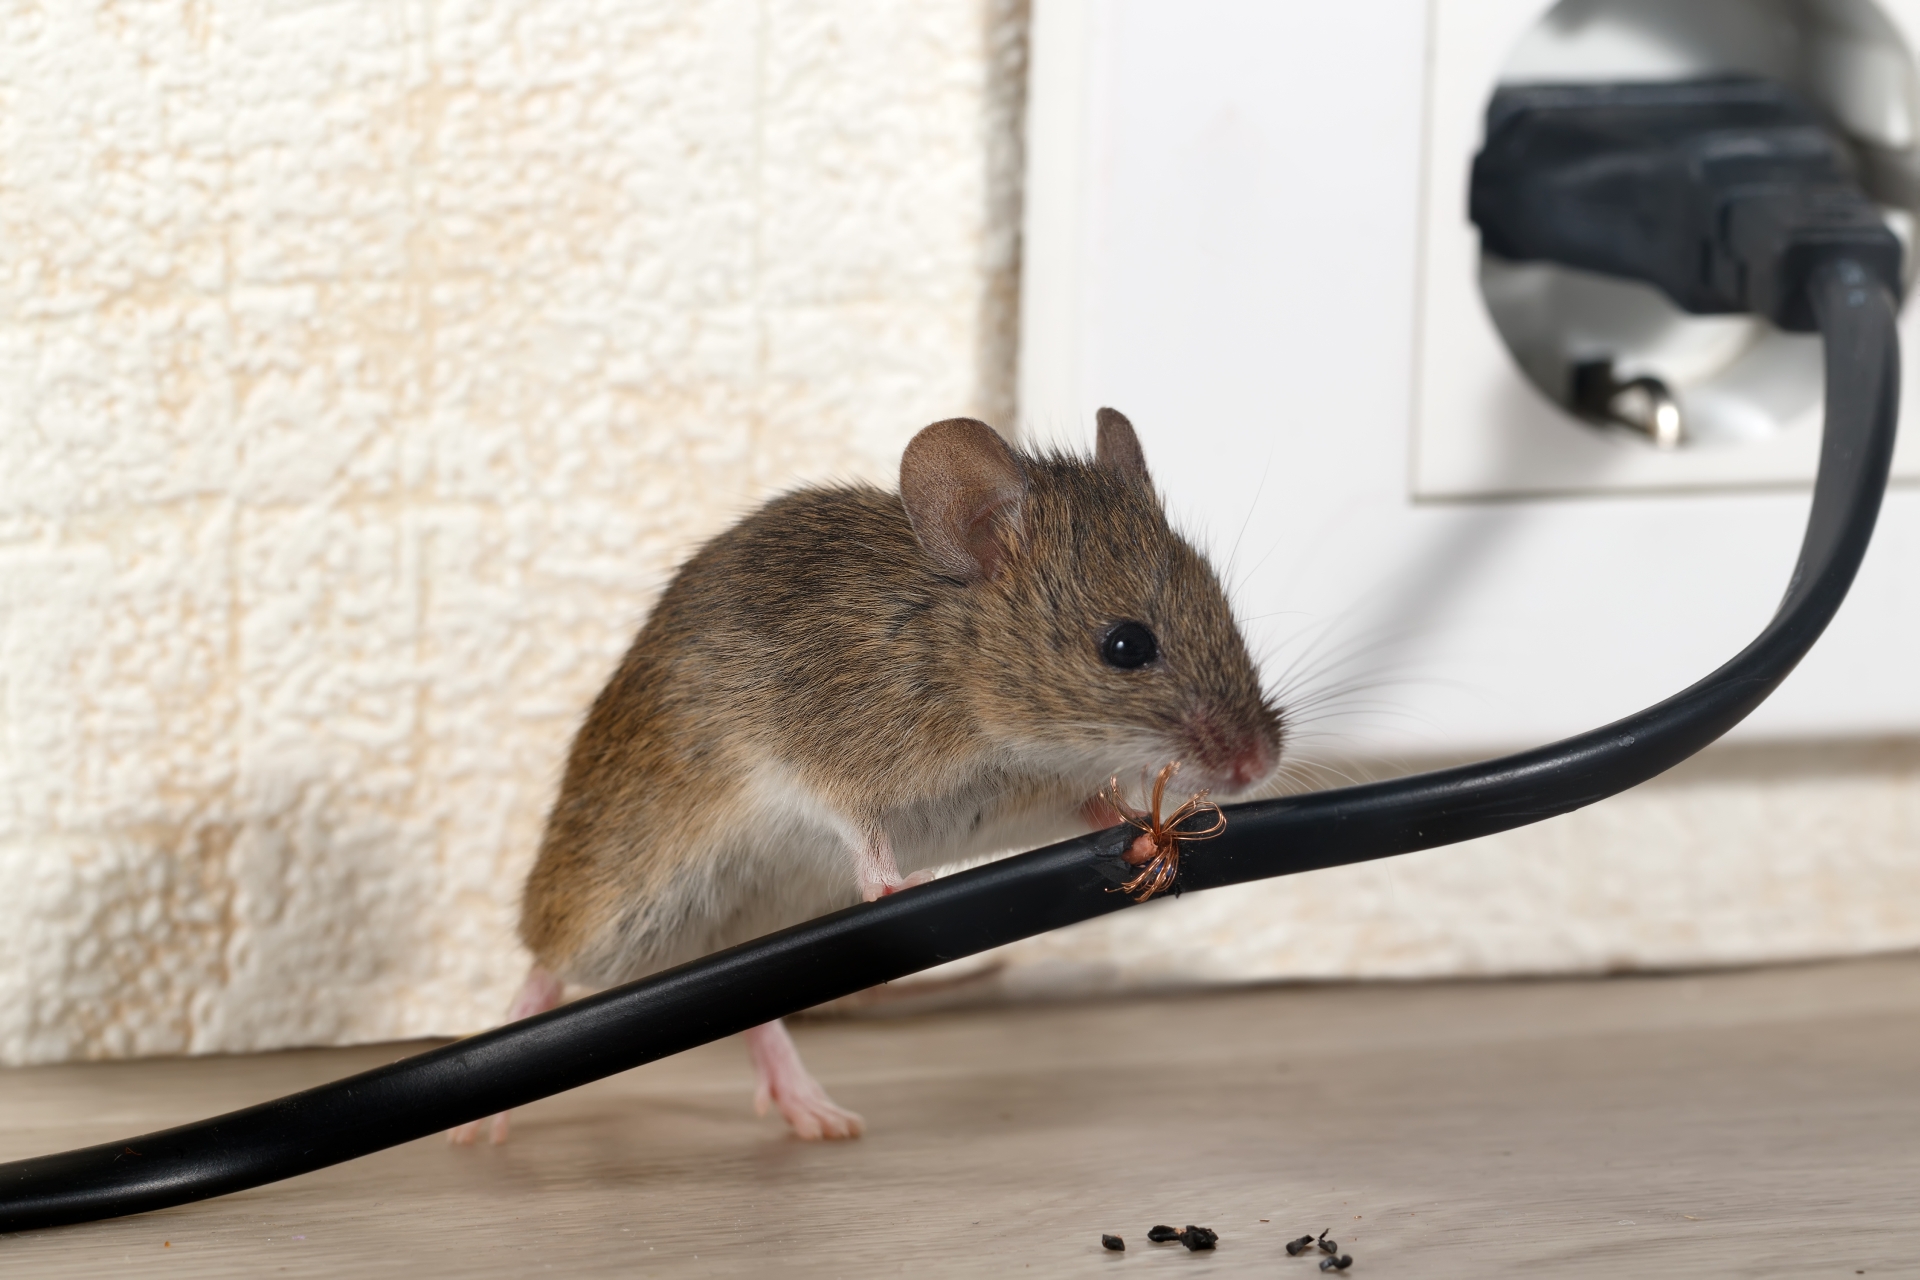 Mice Infestation, Pest Control in Bromley, Bickley, Downham, BR1. Call Now 020 8166 9746